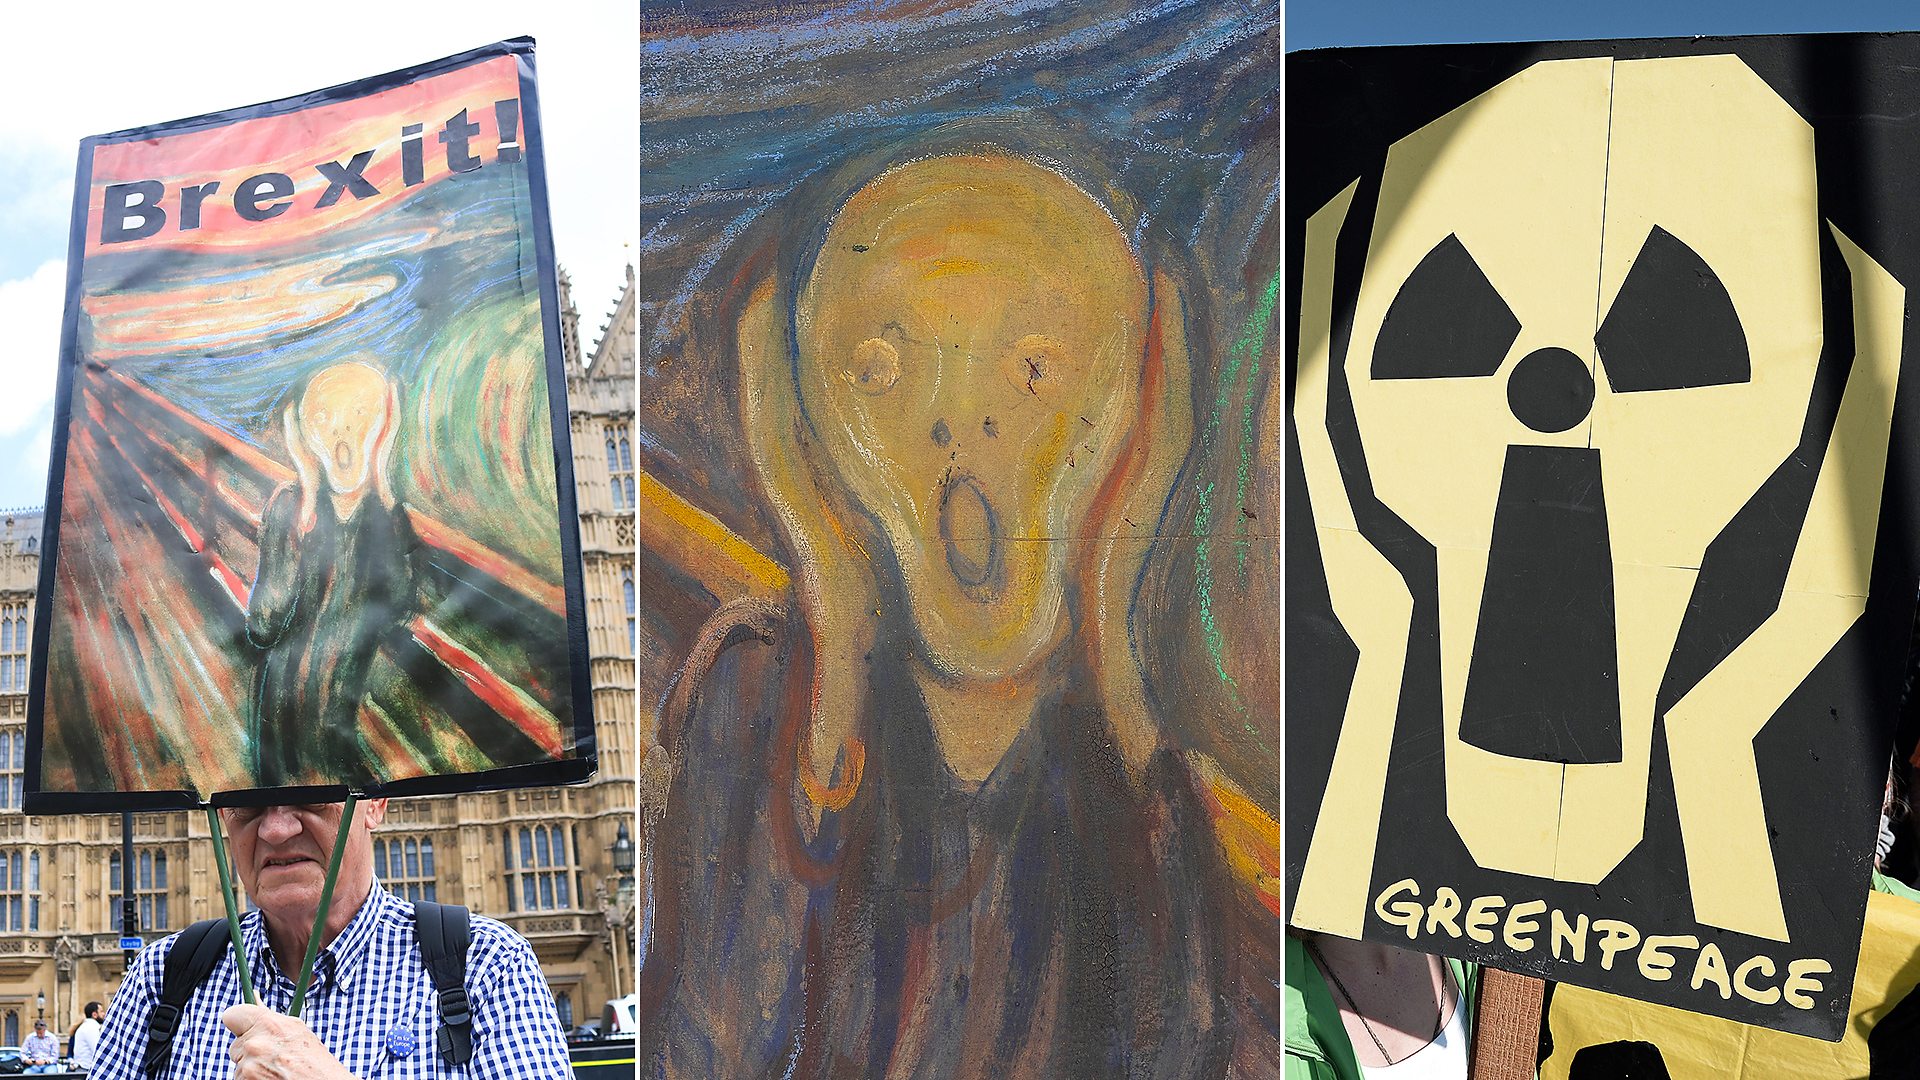 Iconic Expressions: Mona Lisa and The Scream